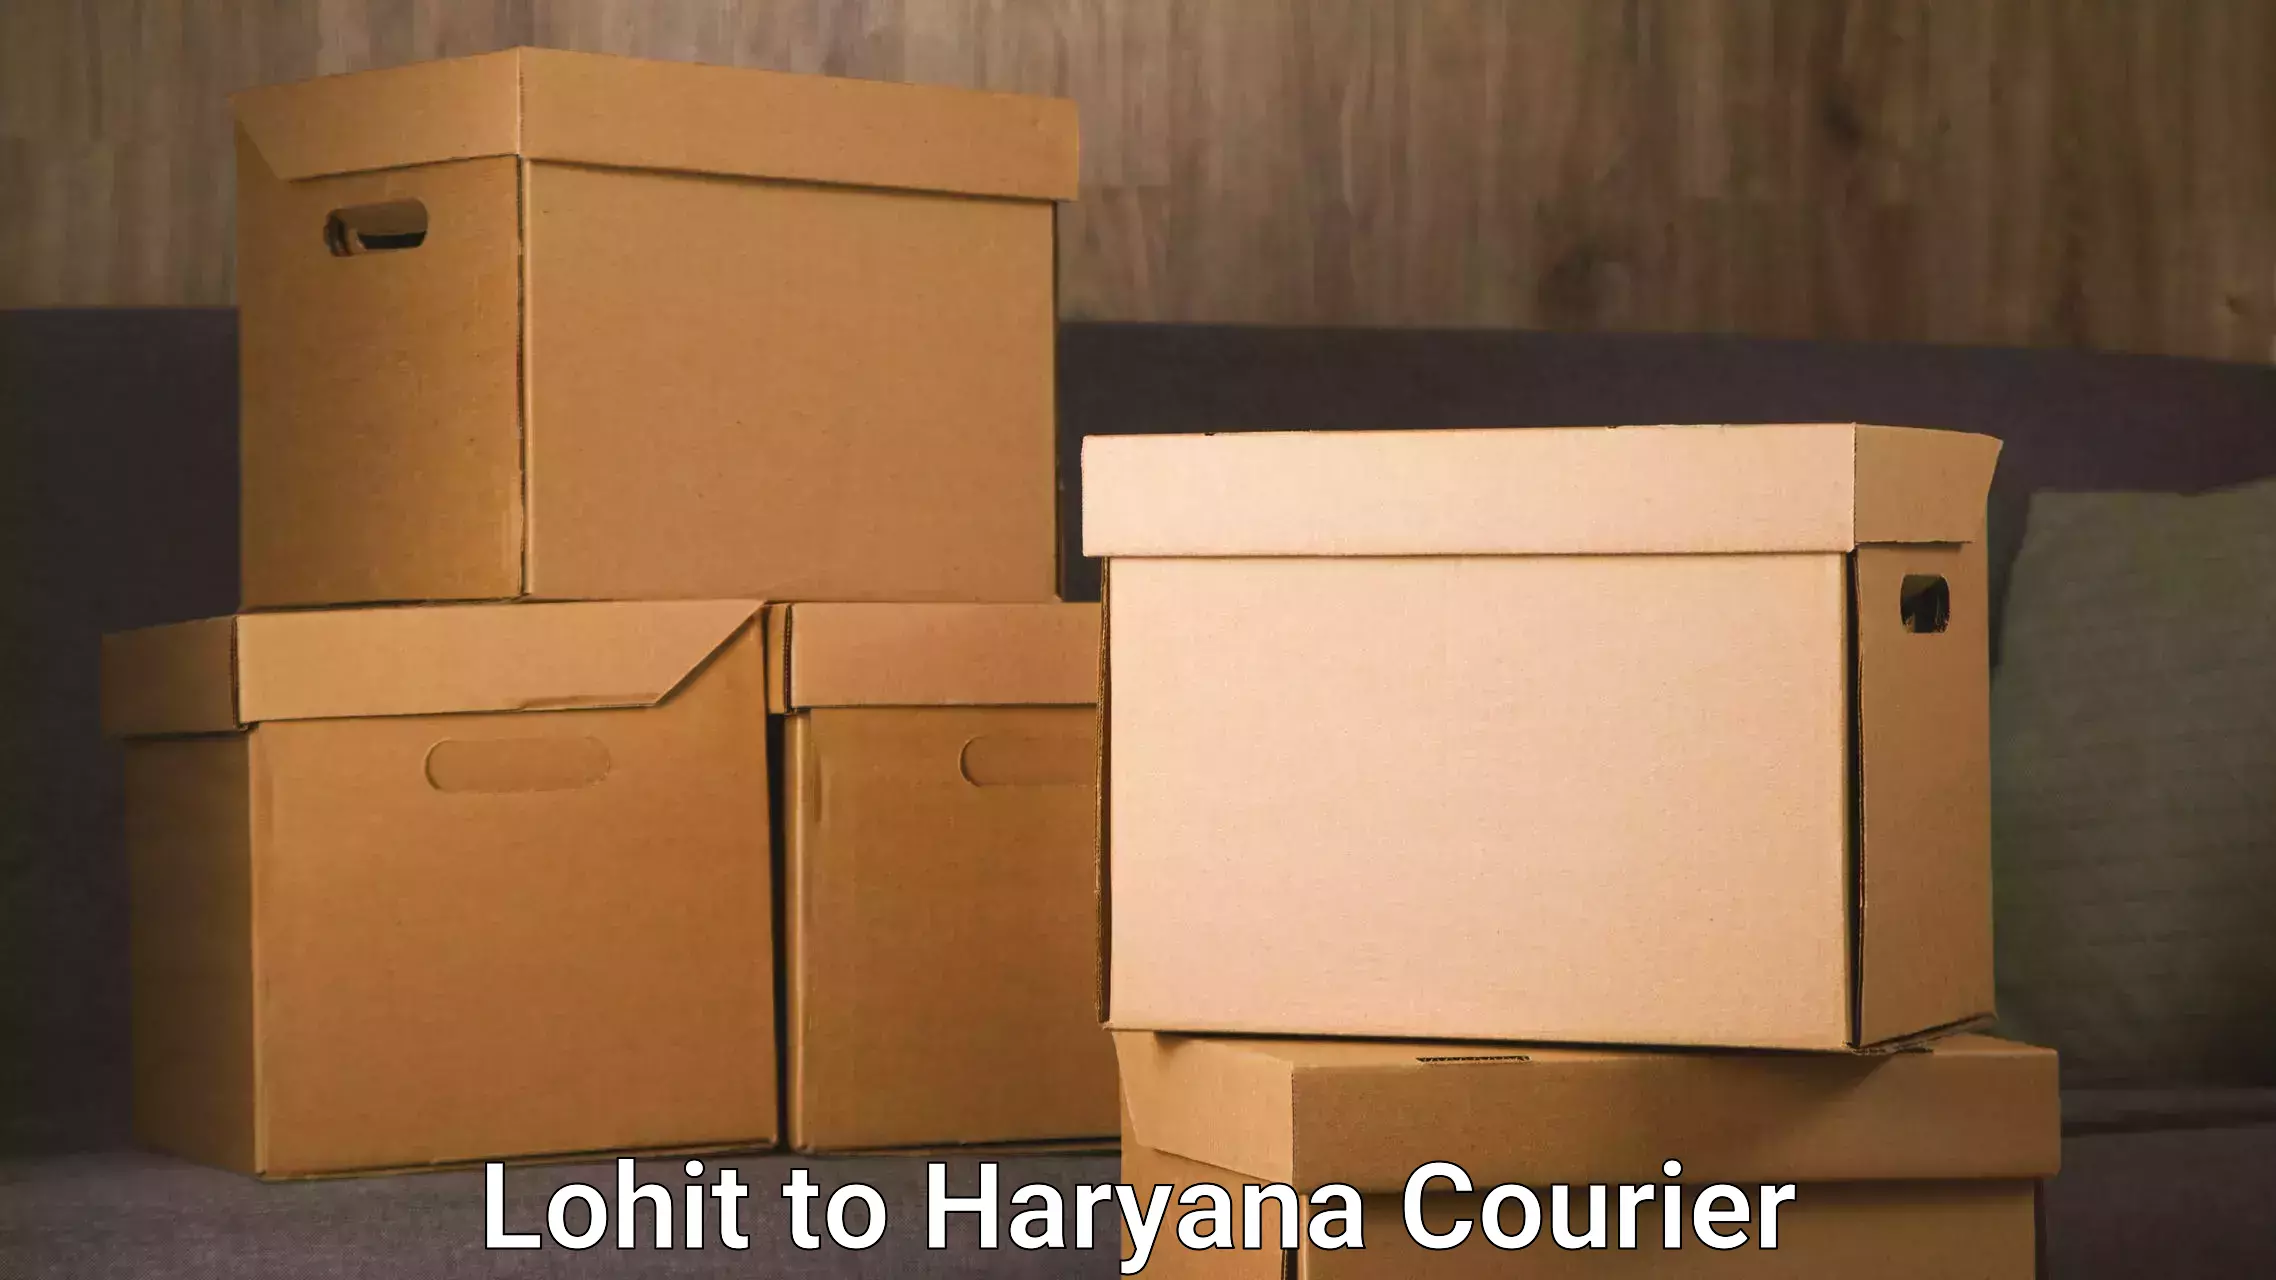 Advanced freight services Lohit to NCR Haryana